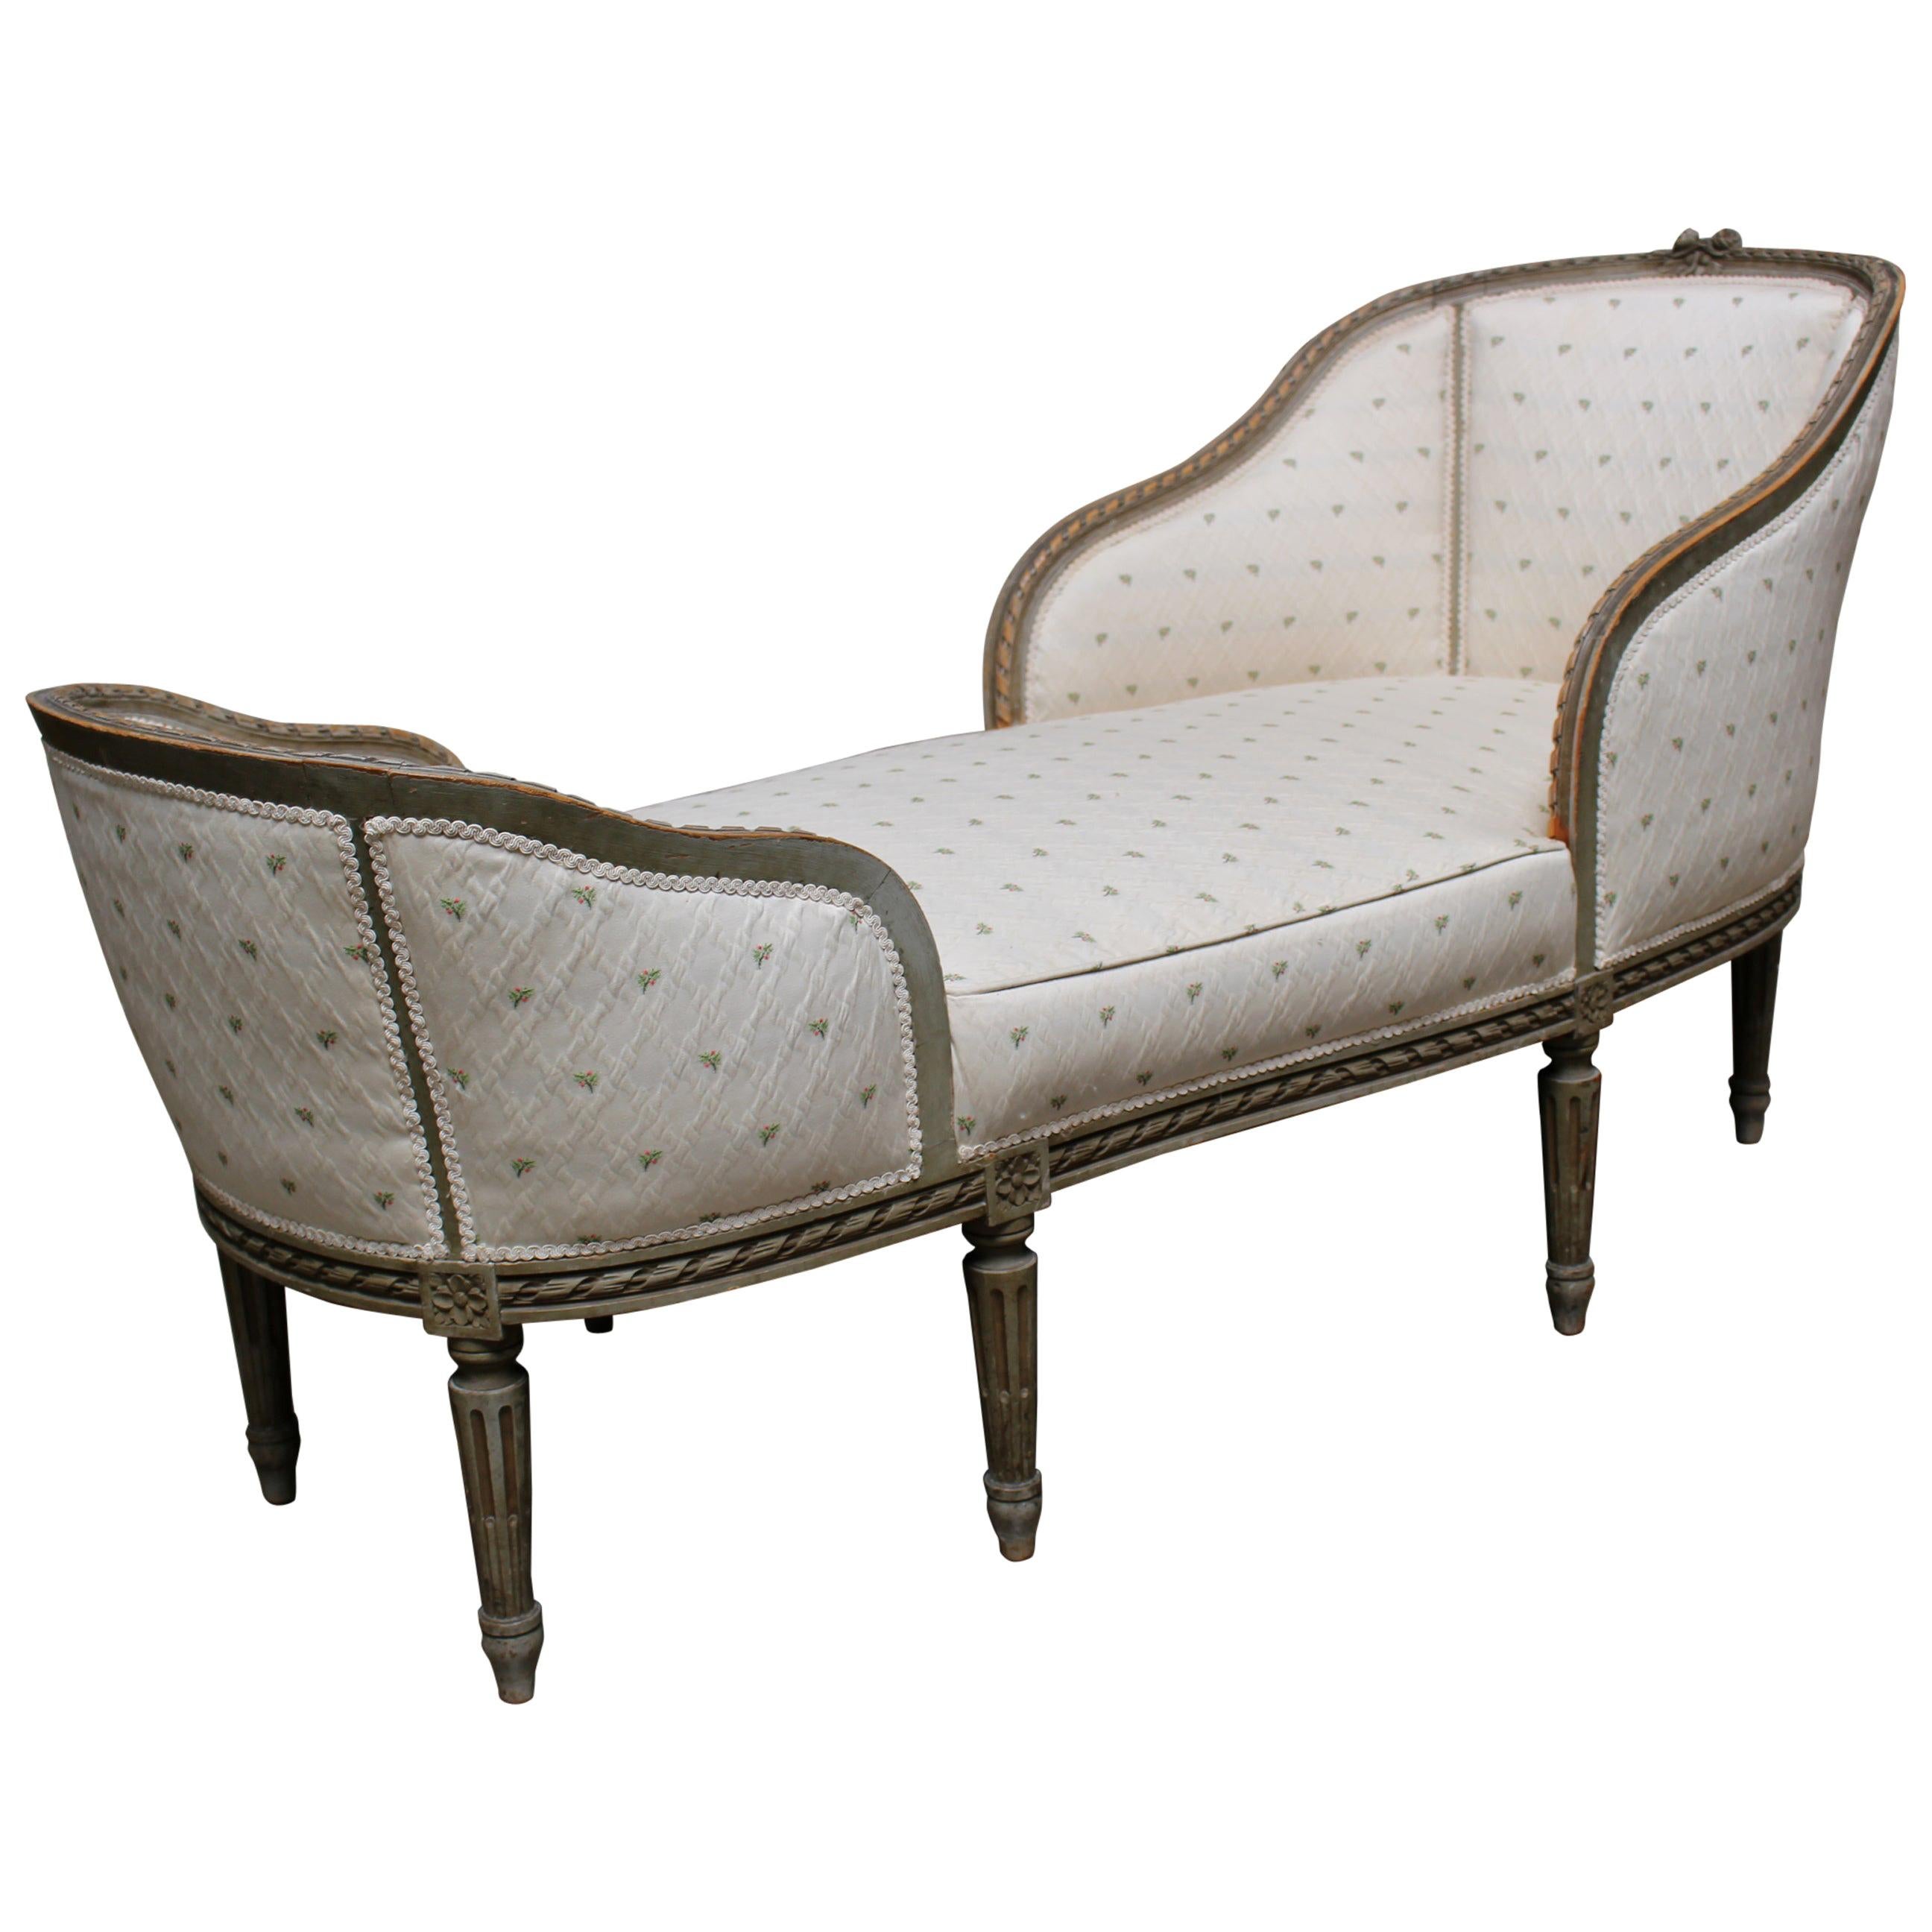 19th Century French Louis XVI Style Chaise Lounge with a Gray Painted Finish